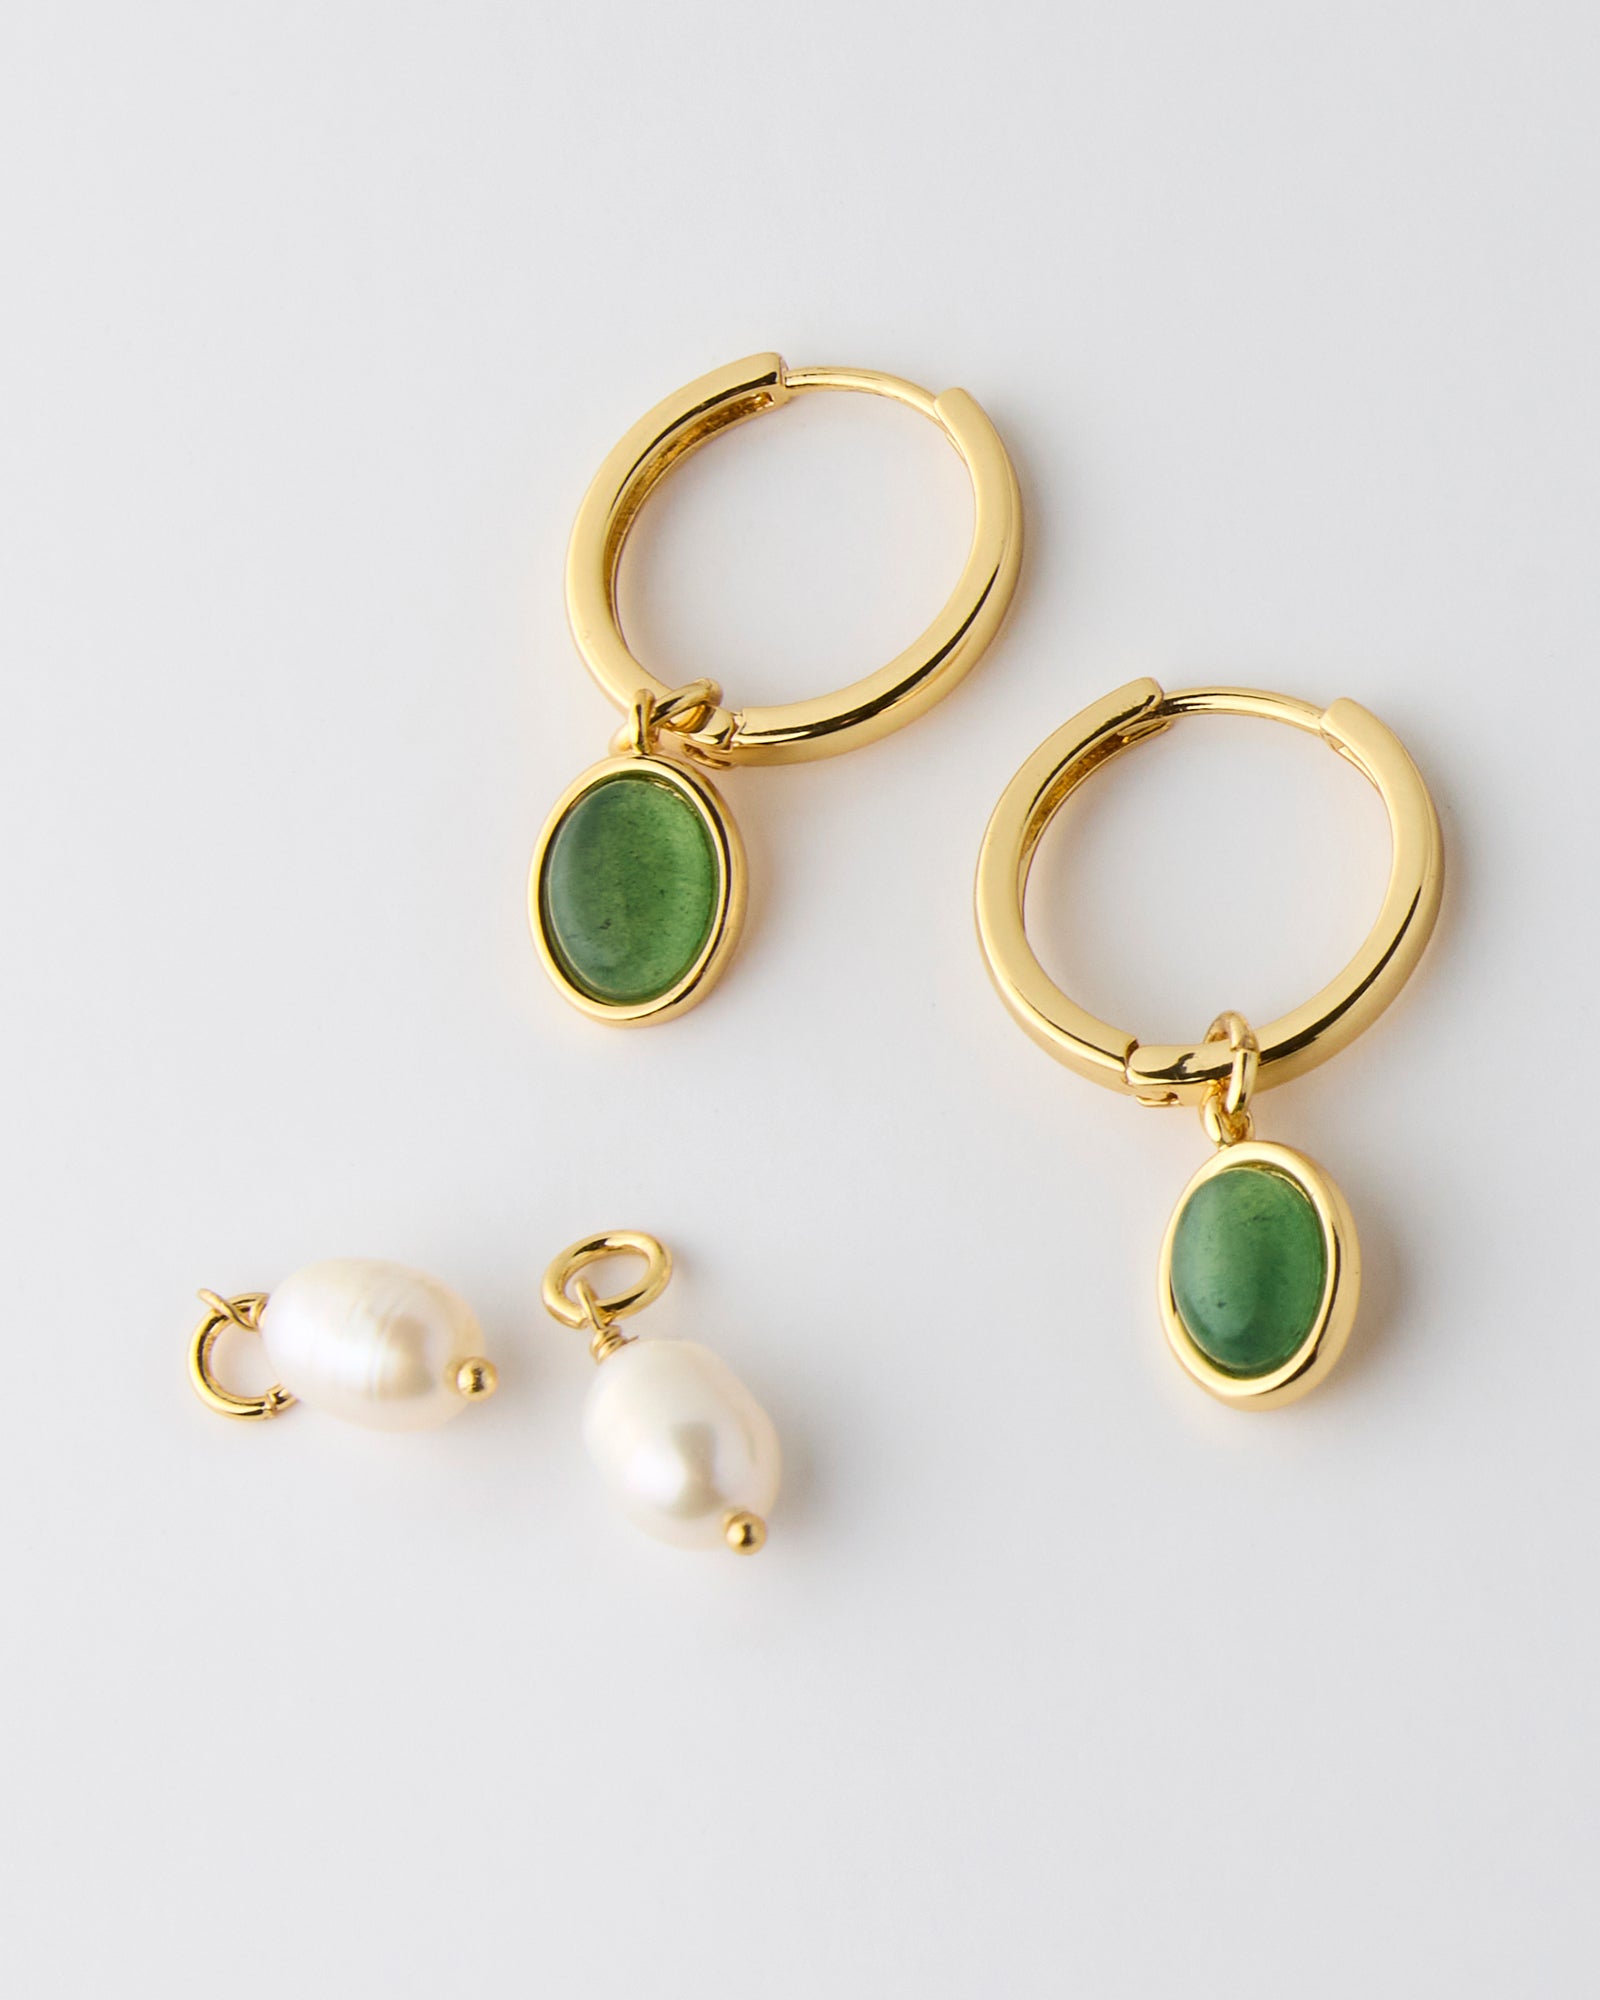 Gold hoops with interchangeable pendants of green stone or pearl